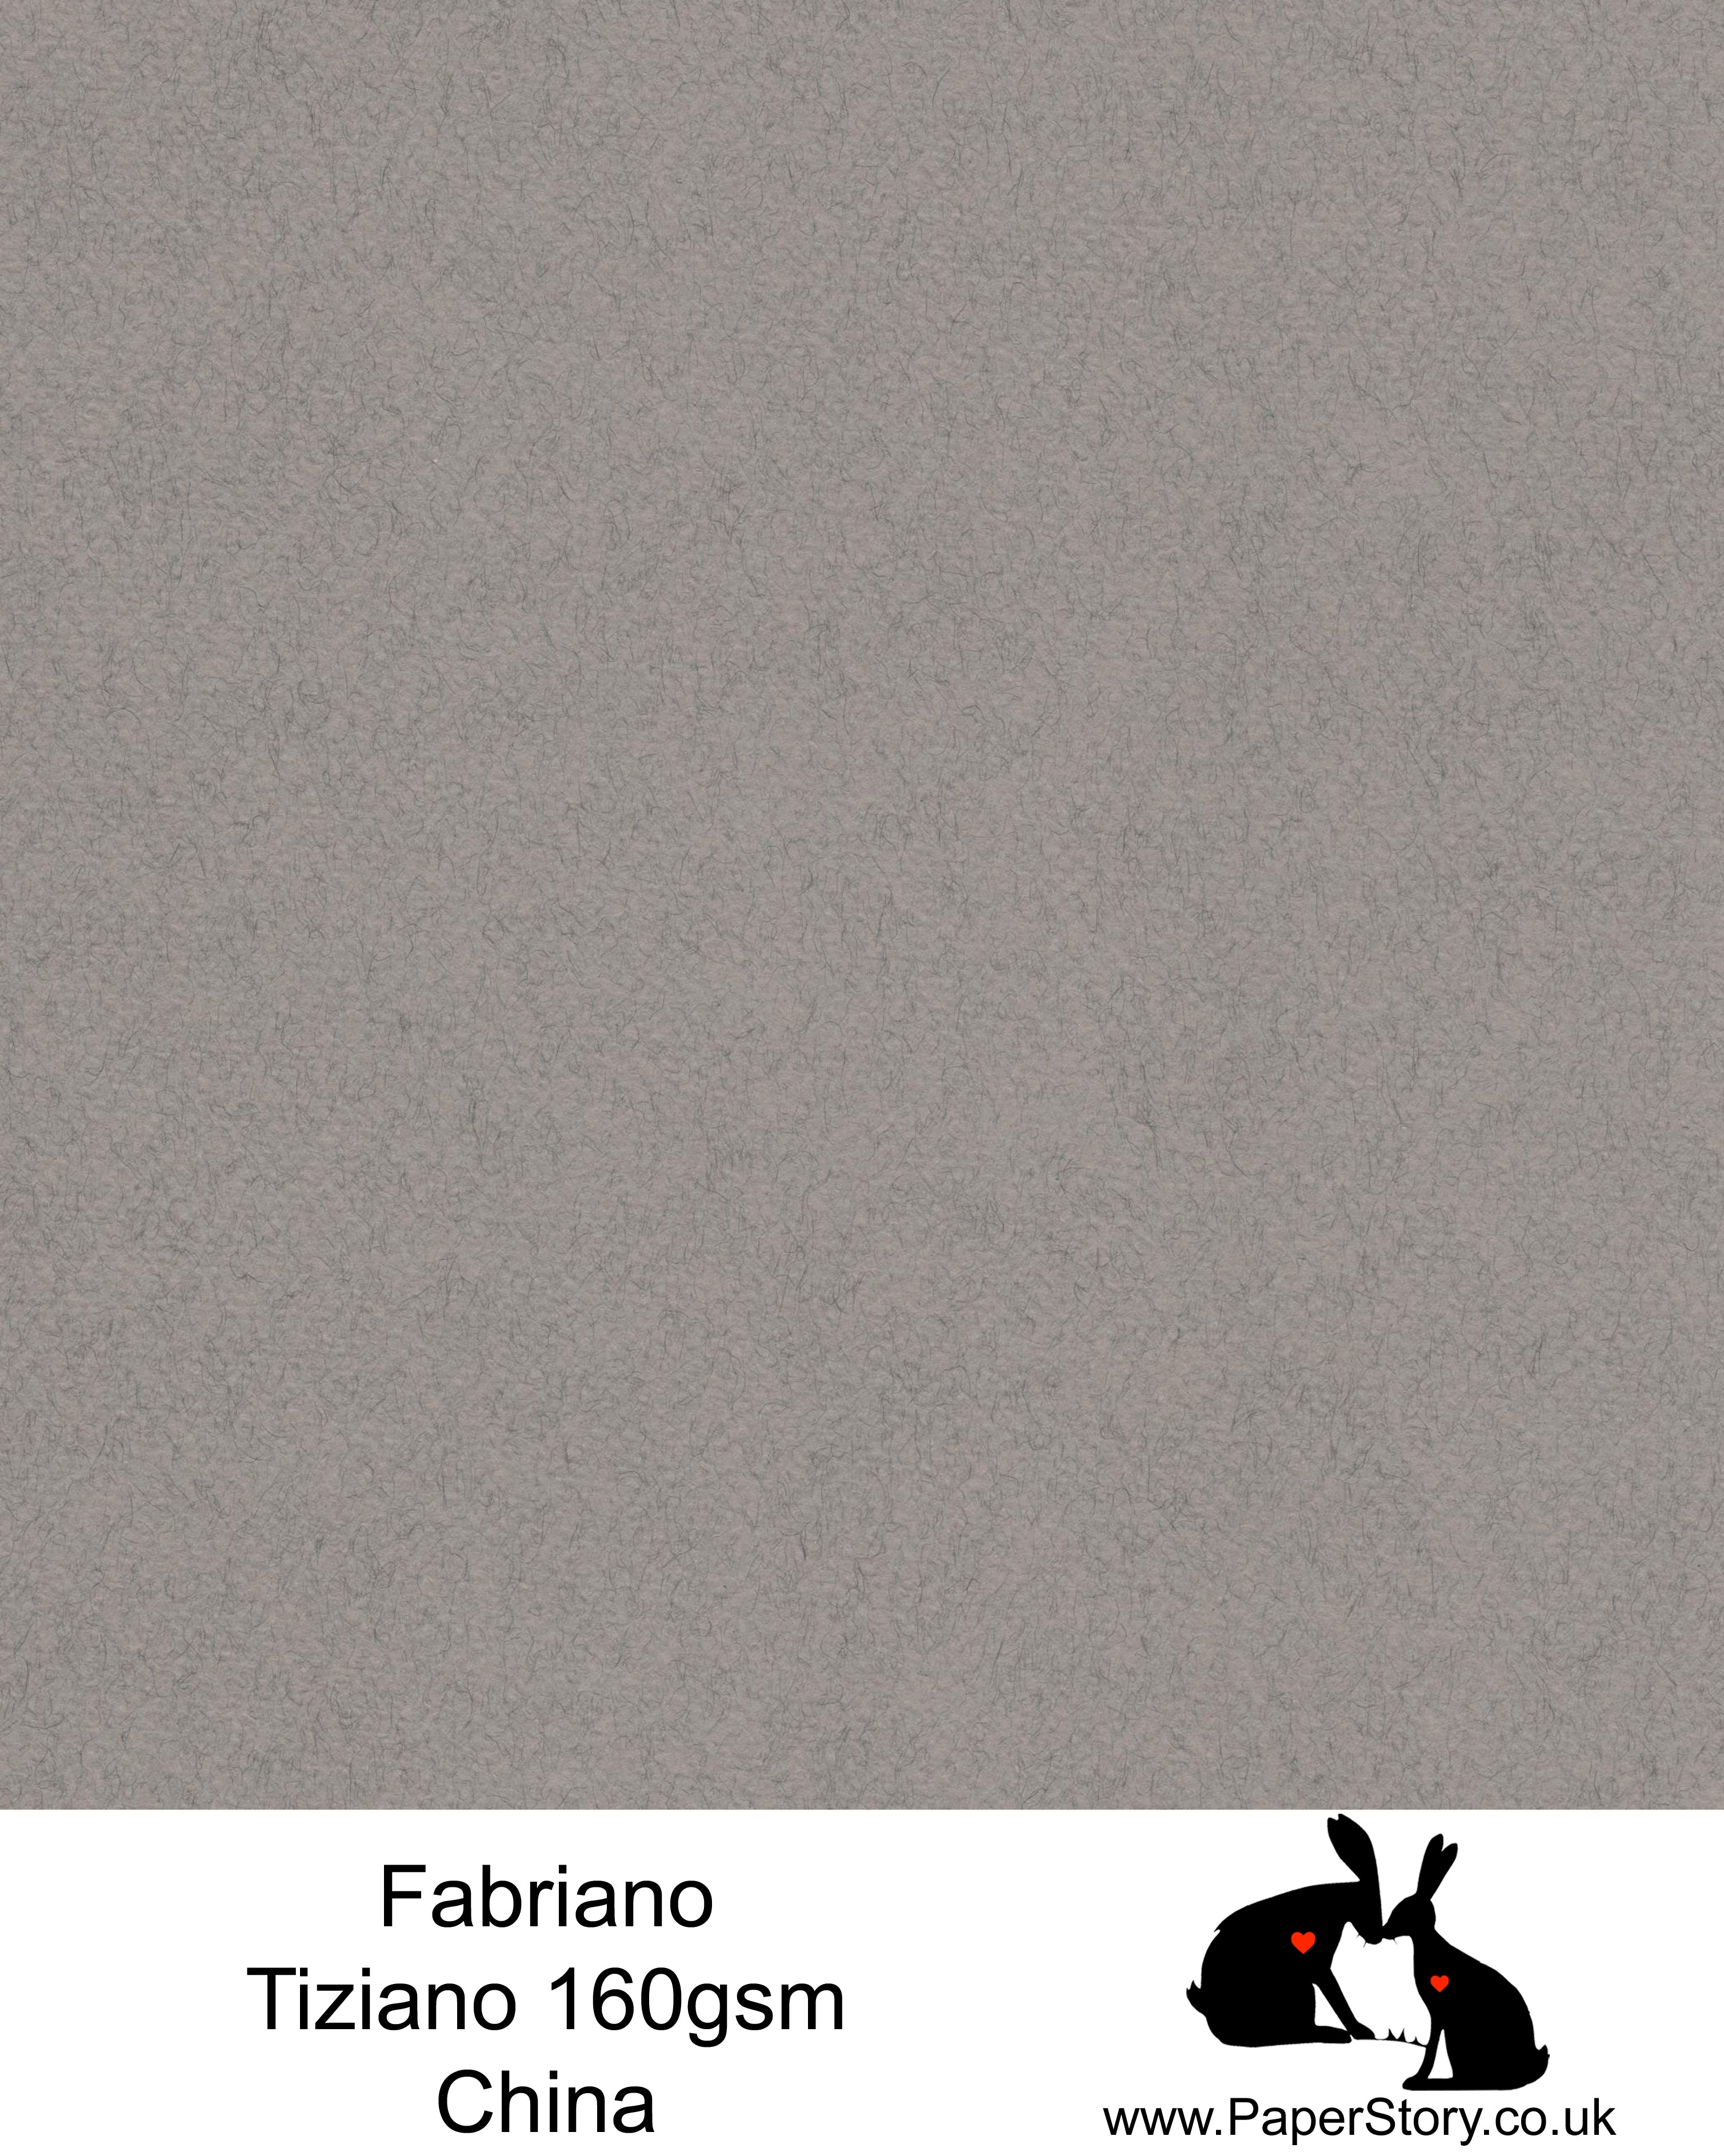 High quality paper from Italy, China mid tone felted grey Fabriano Tiziano is 160 gsm, Tiziano has a high cotton content, a textured naturally sized surface. This paper is acid free to guarantee long permanence in time, pH neutral. It has highly lightfast colours, an excellent surface making and sizing which make this paper particularly suitable for papercutting, pastels, pencil, graphite, charcoal, tempera, air brush and watercolour techniques. Tiziano can be used for all printing techniques.